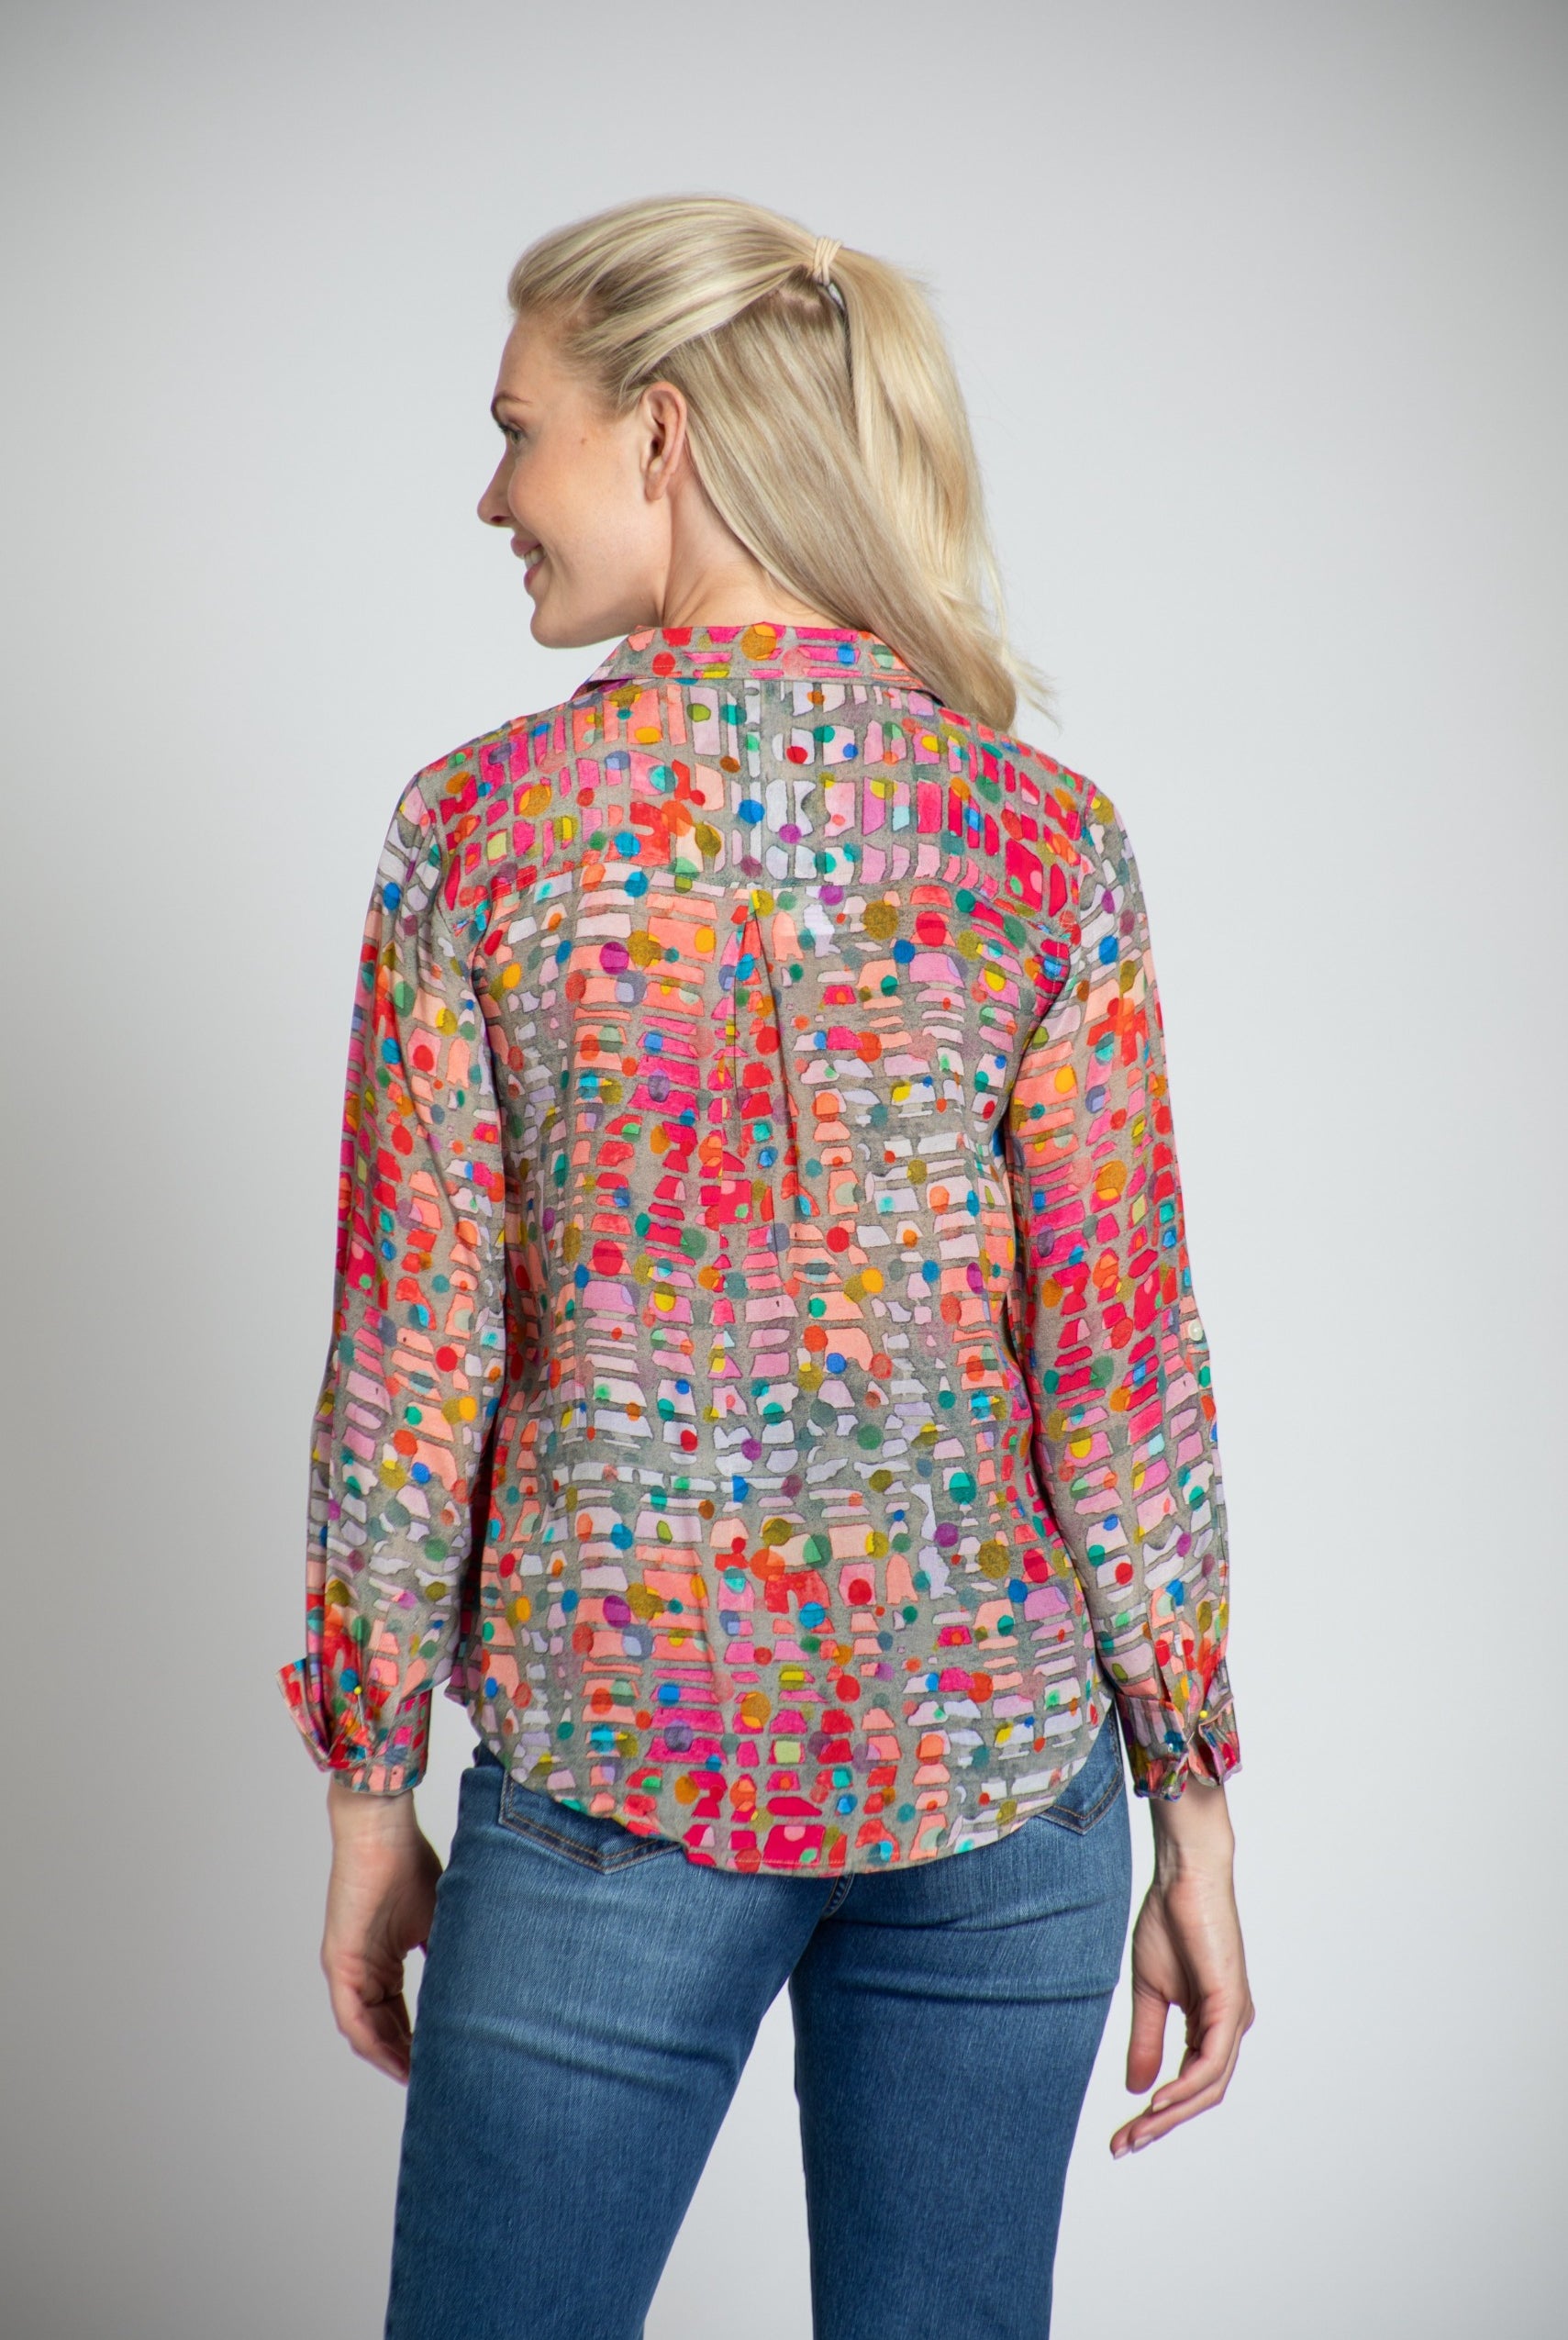 Colour Theory Confetti Print - Button-up With Roll-up Sleeve